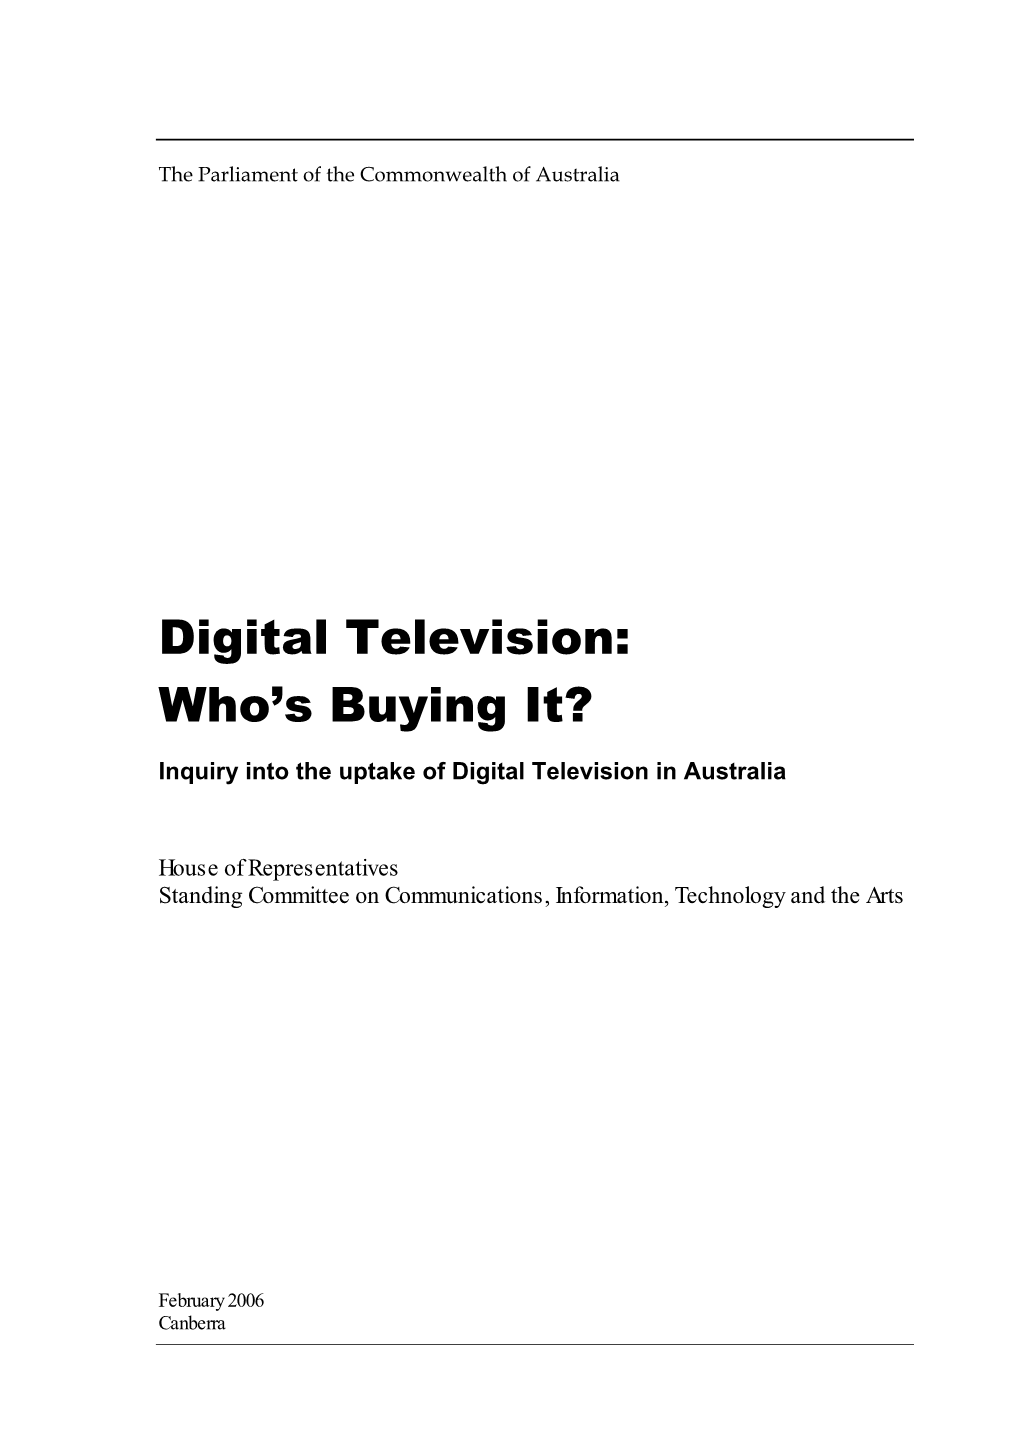 Full Report: Digital Television: Who's Buying